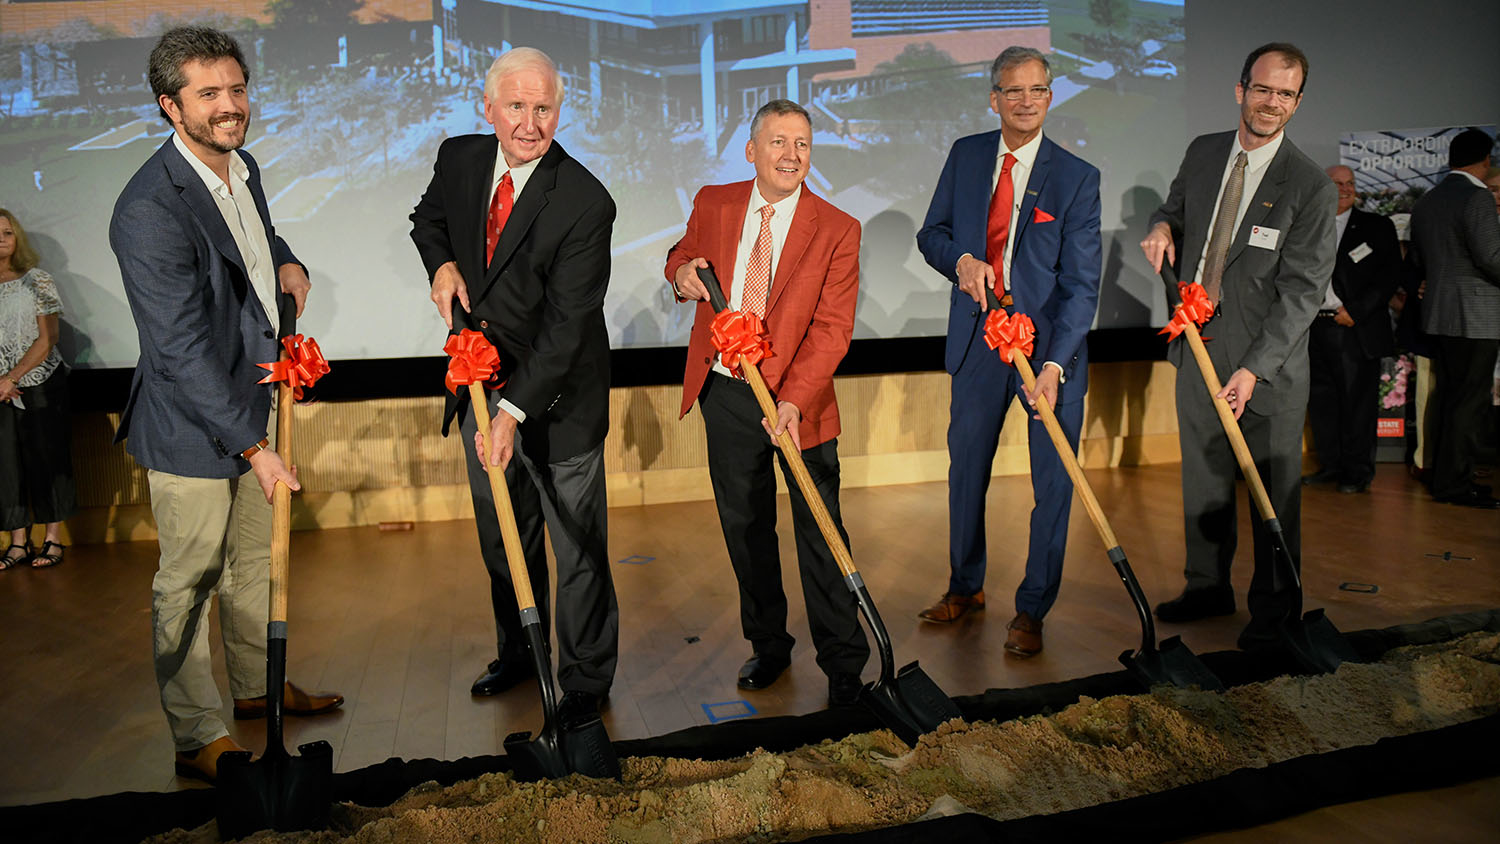 Owen Wagner (far left) and other foundational supporters for the Plant Sciences Initiative during the Plant Sciences Building groundbreaking on September 6, 2019.